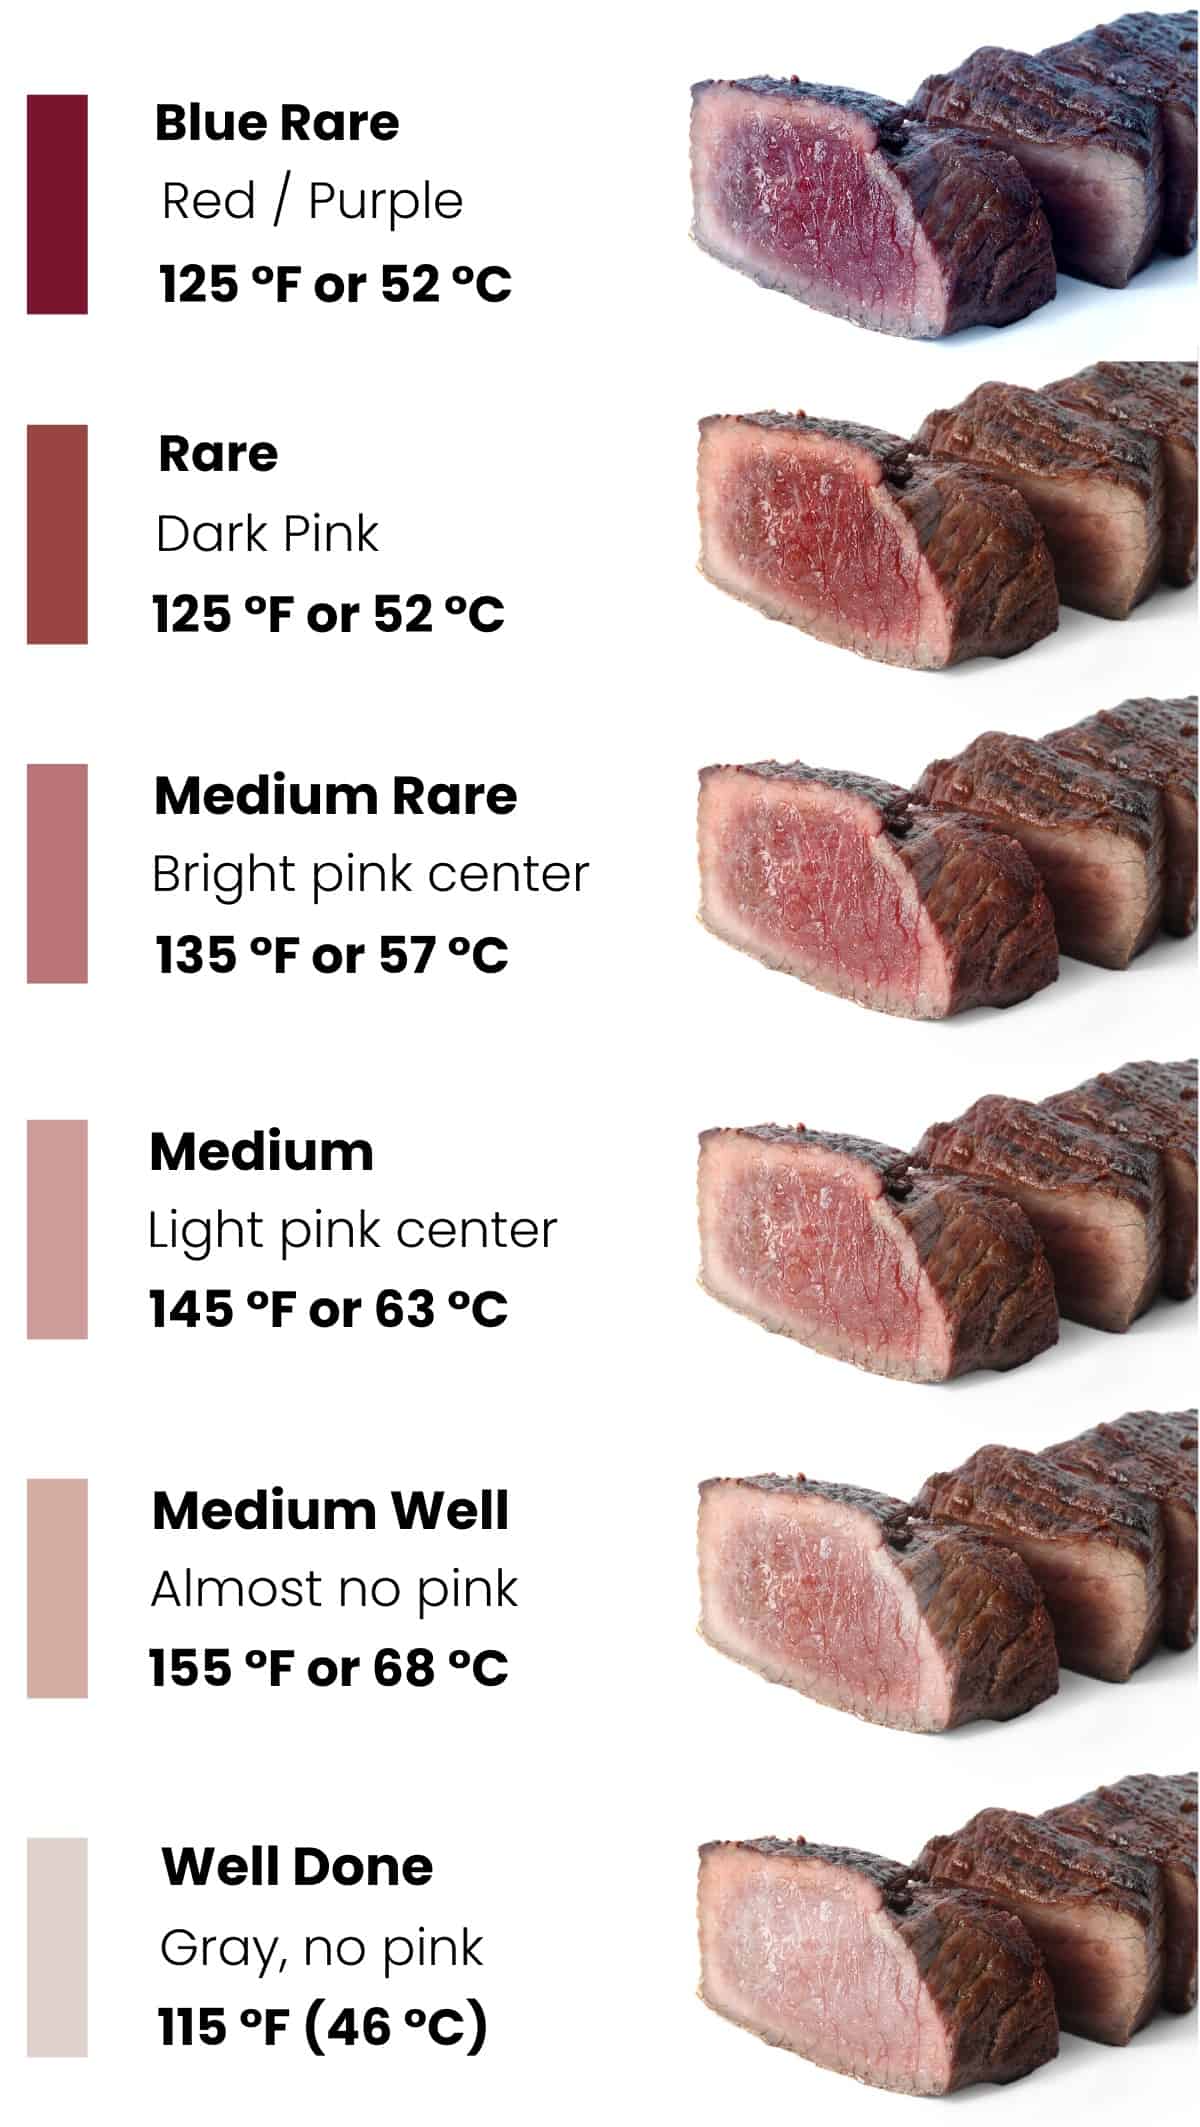 A diagram showing steak doneness levels from blue rare to well.